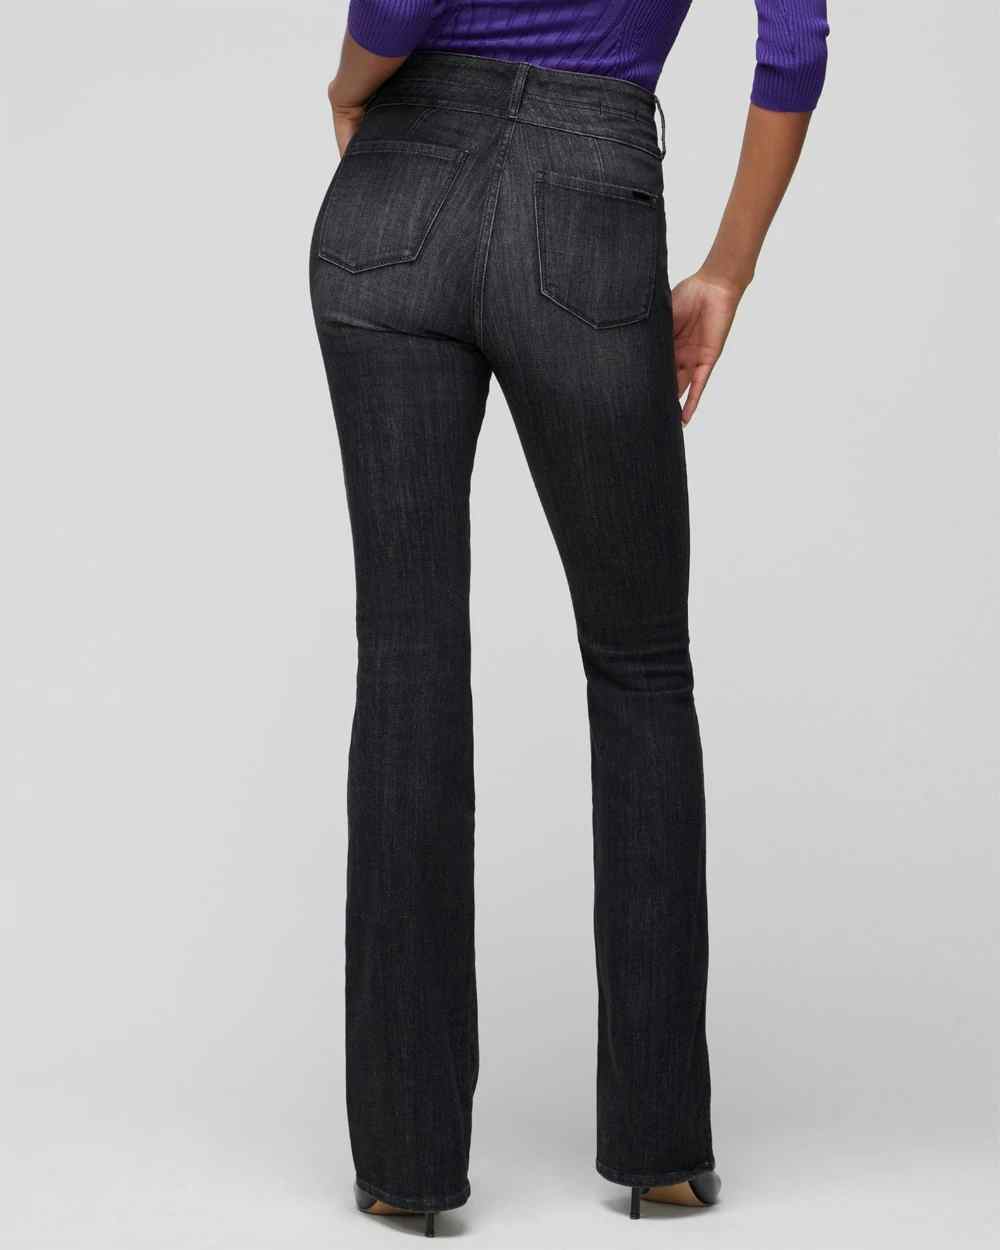 Pintuck House Market White | Skinny Extra-High Jeans Flare Rise Black